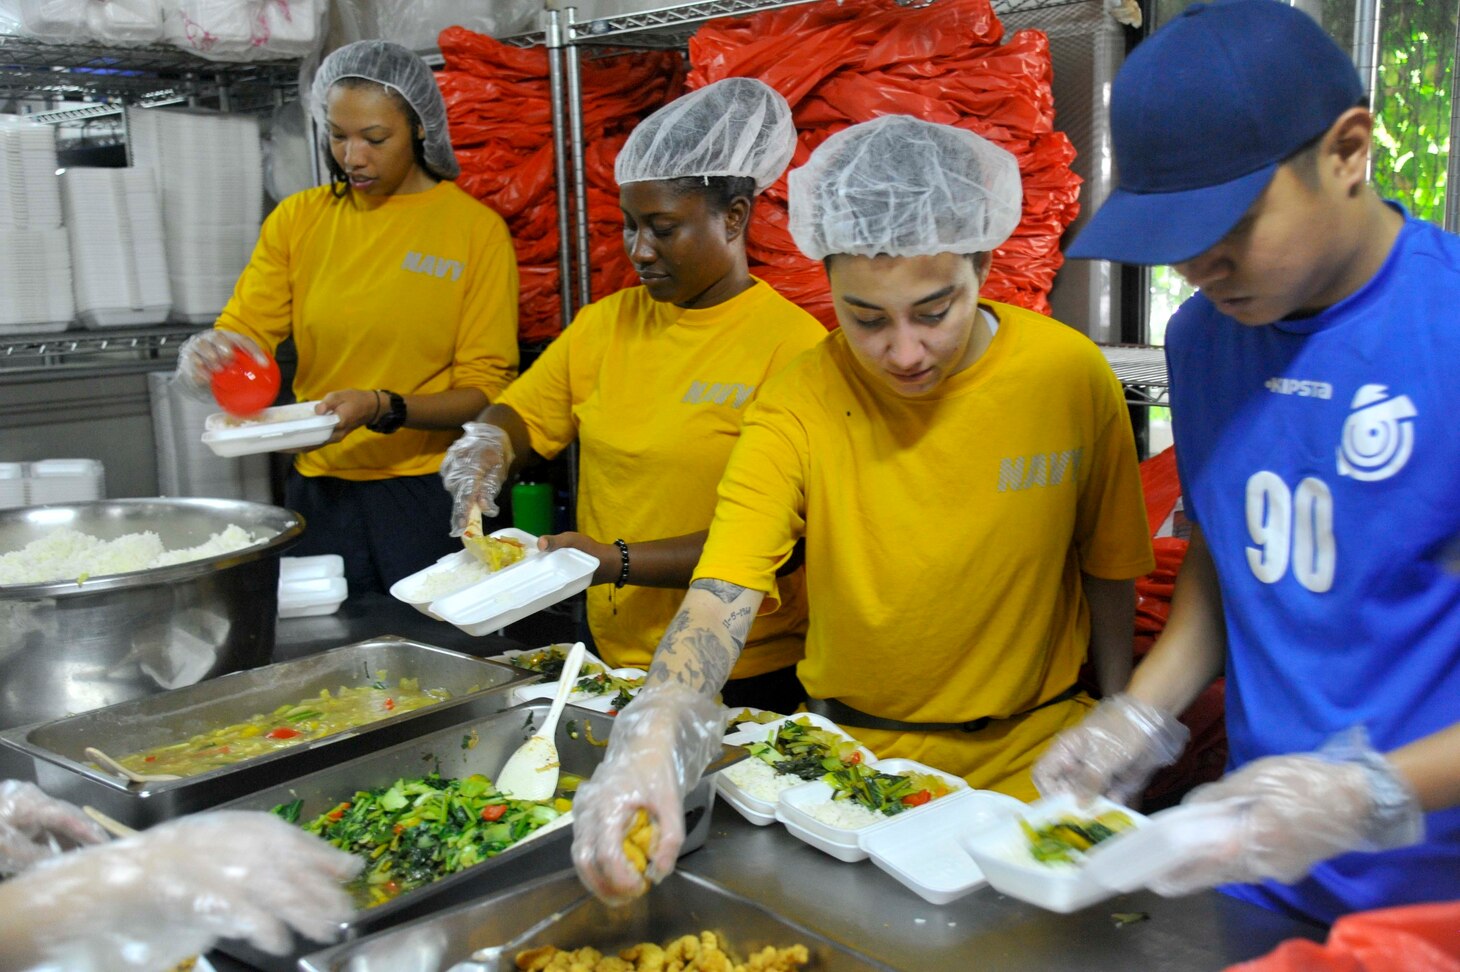 SINGAPORE (Dec. 20, 2018) – Sailors assigned to the submarine tender USS Emory S. Land (AS 39) build meal boxes during a community service event at the Willing Hearts Soup Kitchen in Singapore, Dec. 20. Emory S. Land is a forward-deployed expeditionary submarine tender on an extended deployment conducting coordinated tended moorings and afloat maintenance in the U.S. 5th and 7th Fleet areas of operations.